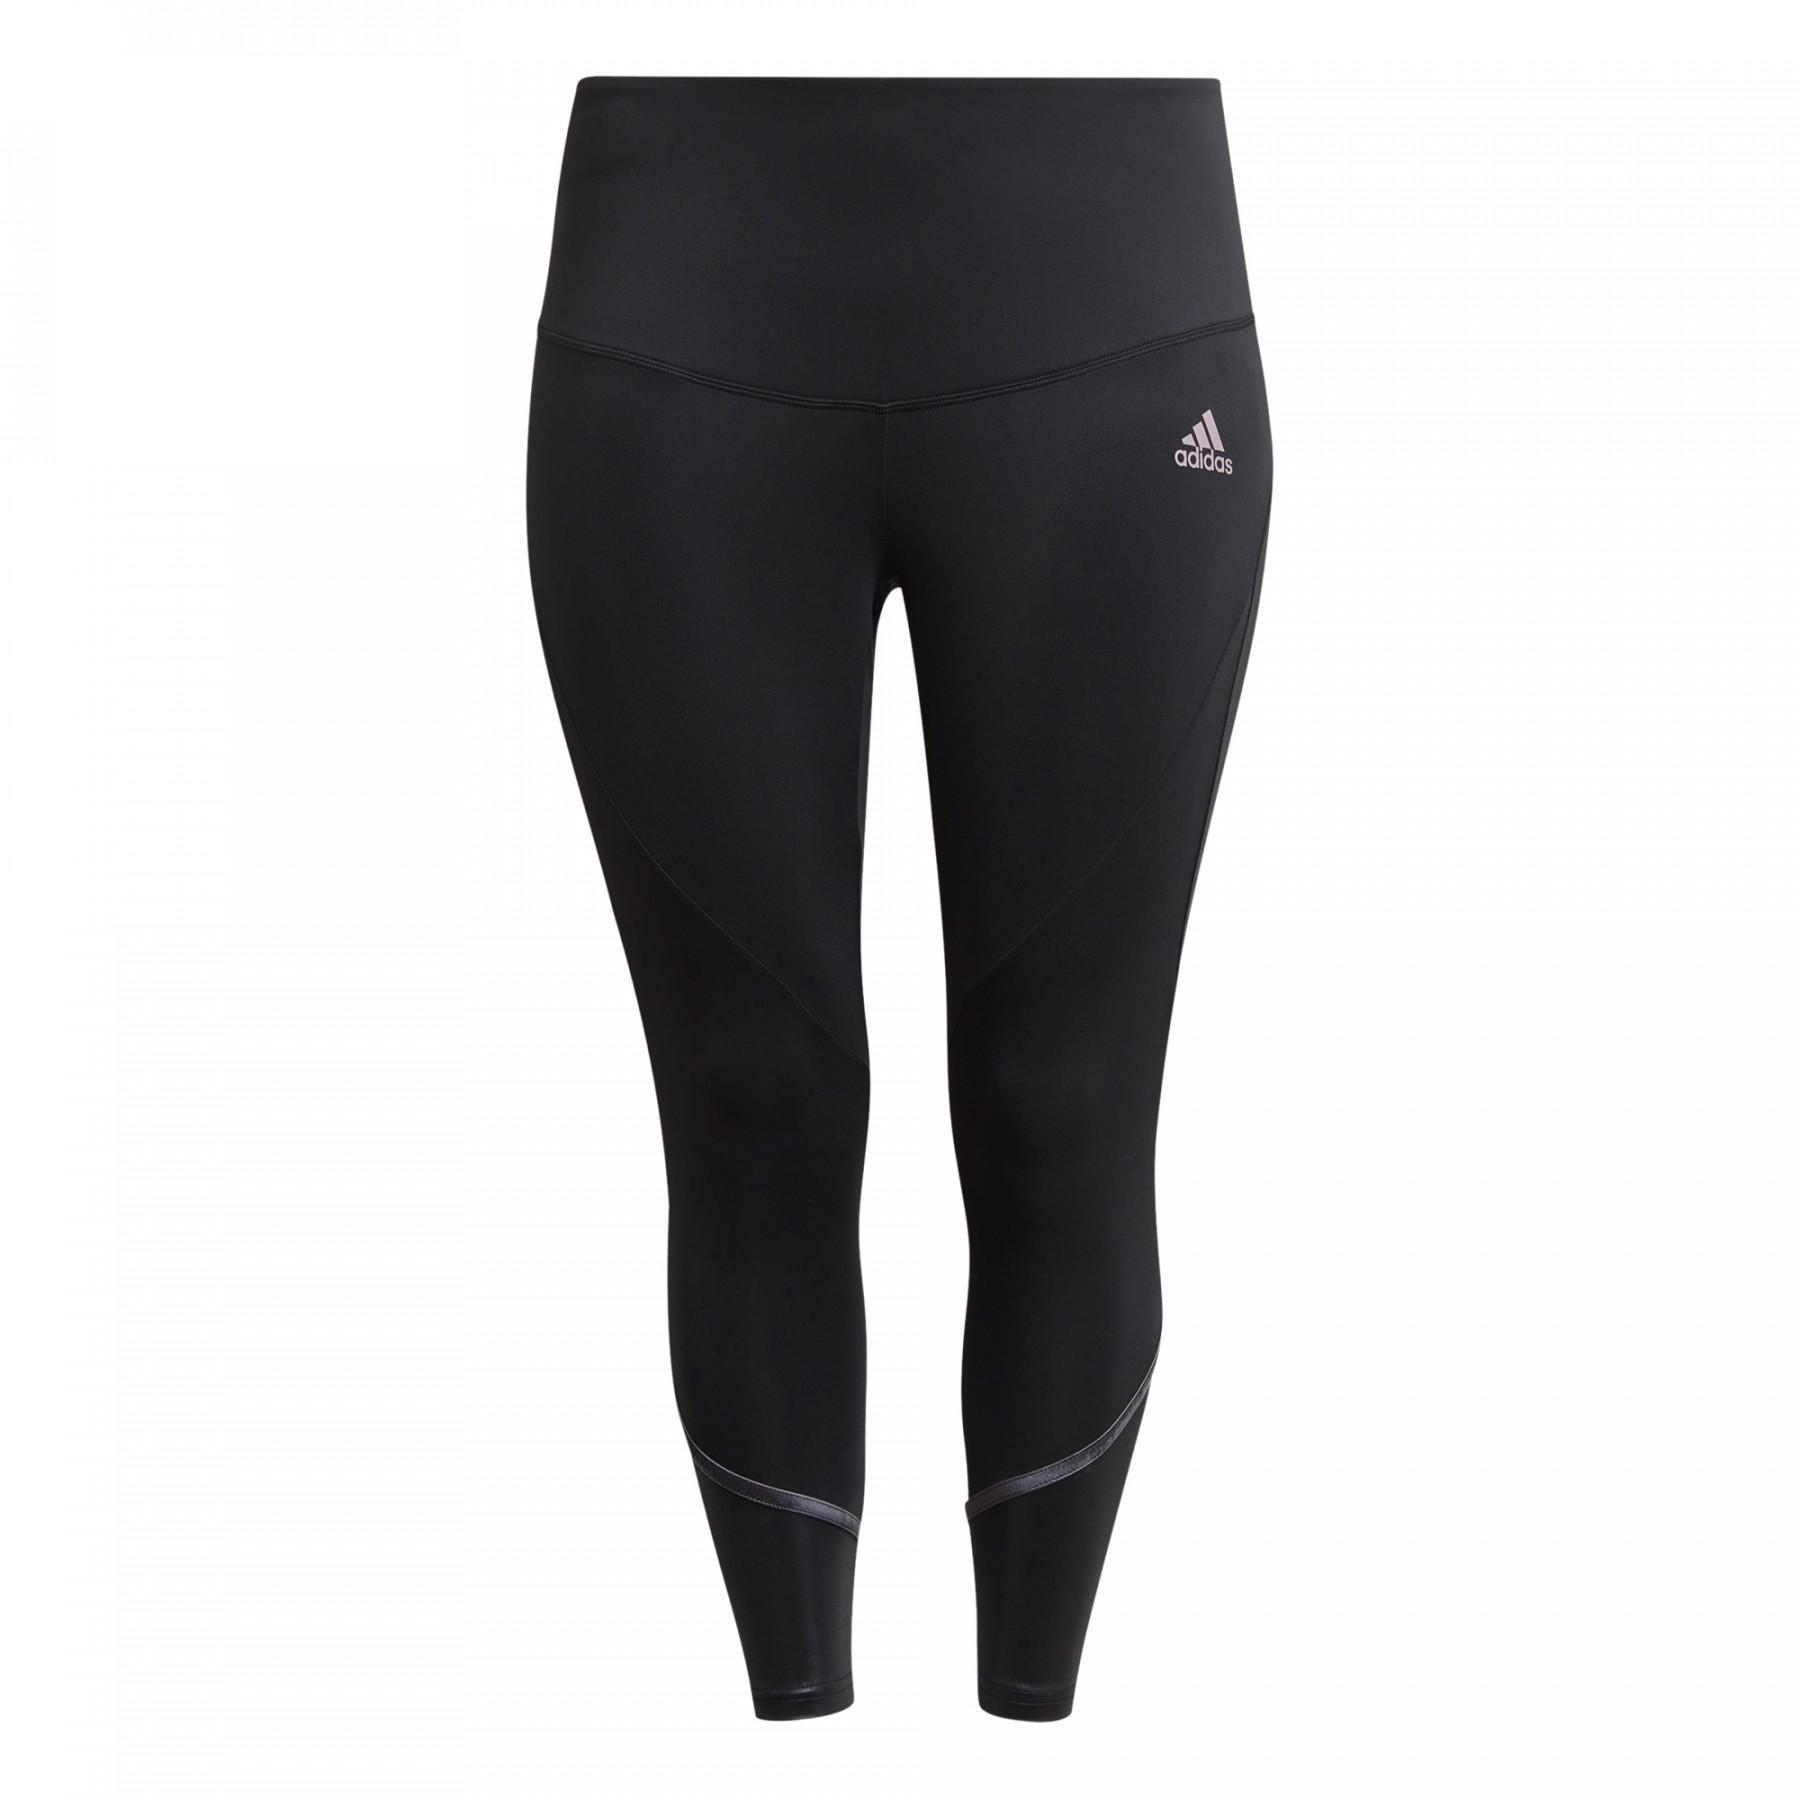 Pernas de mulher adidas Glam-On – grandes tailles